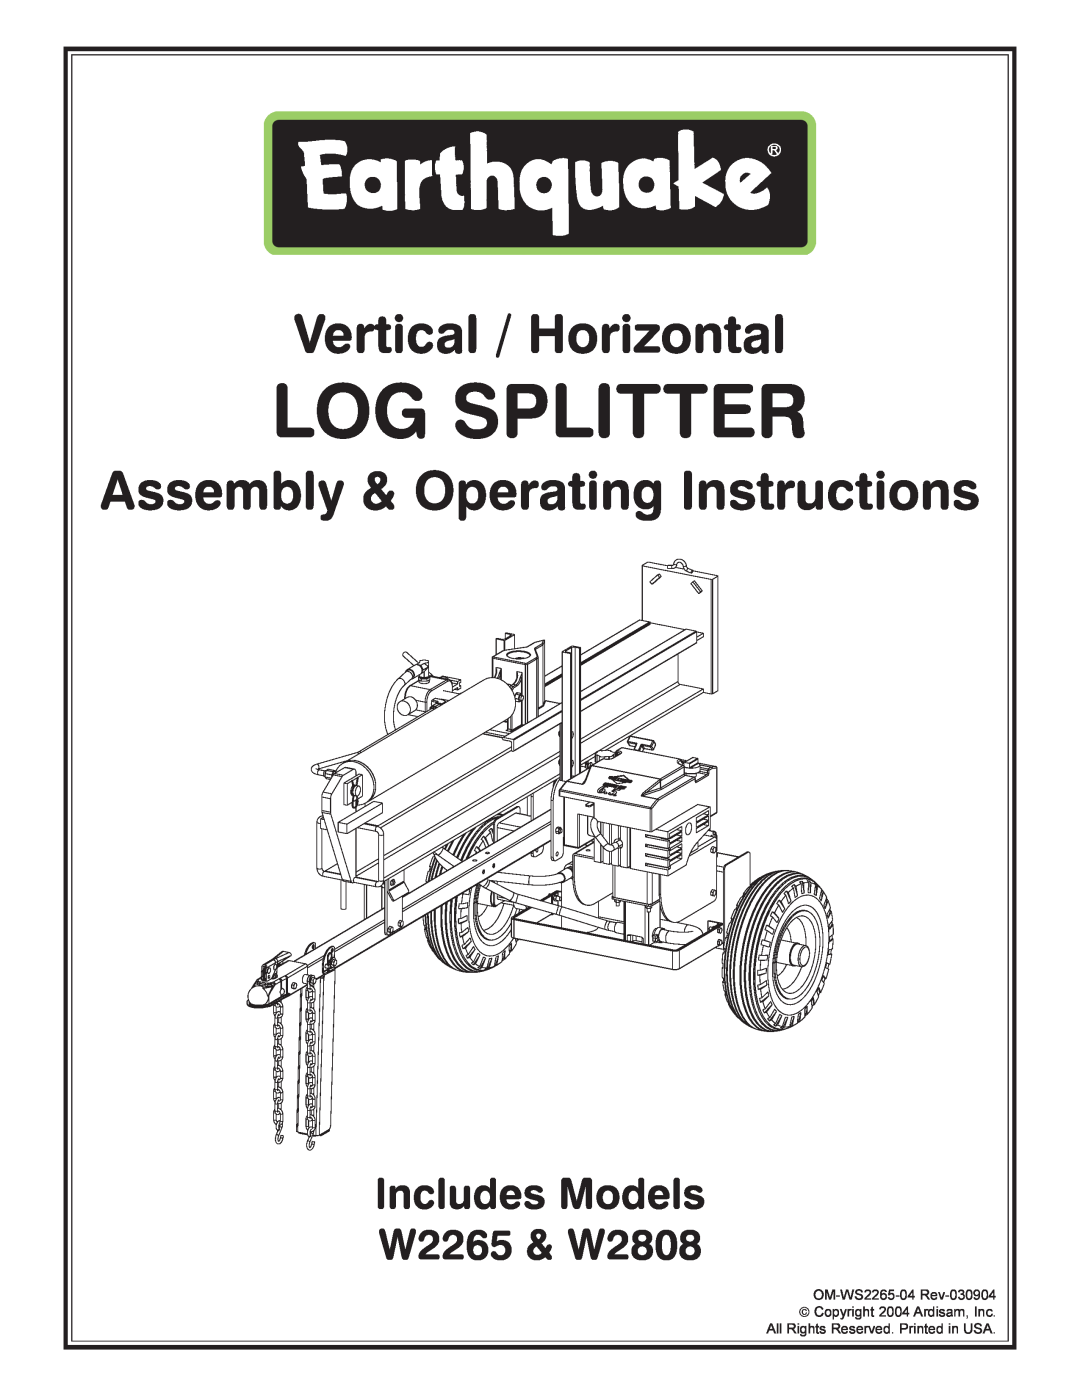 EarthQuake W2265, W2808 operating instructions Log Splitter, Vertical / Horizontal, Assembly & Operating Instructions 